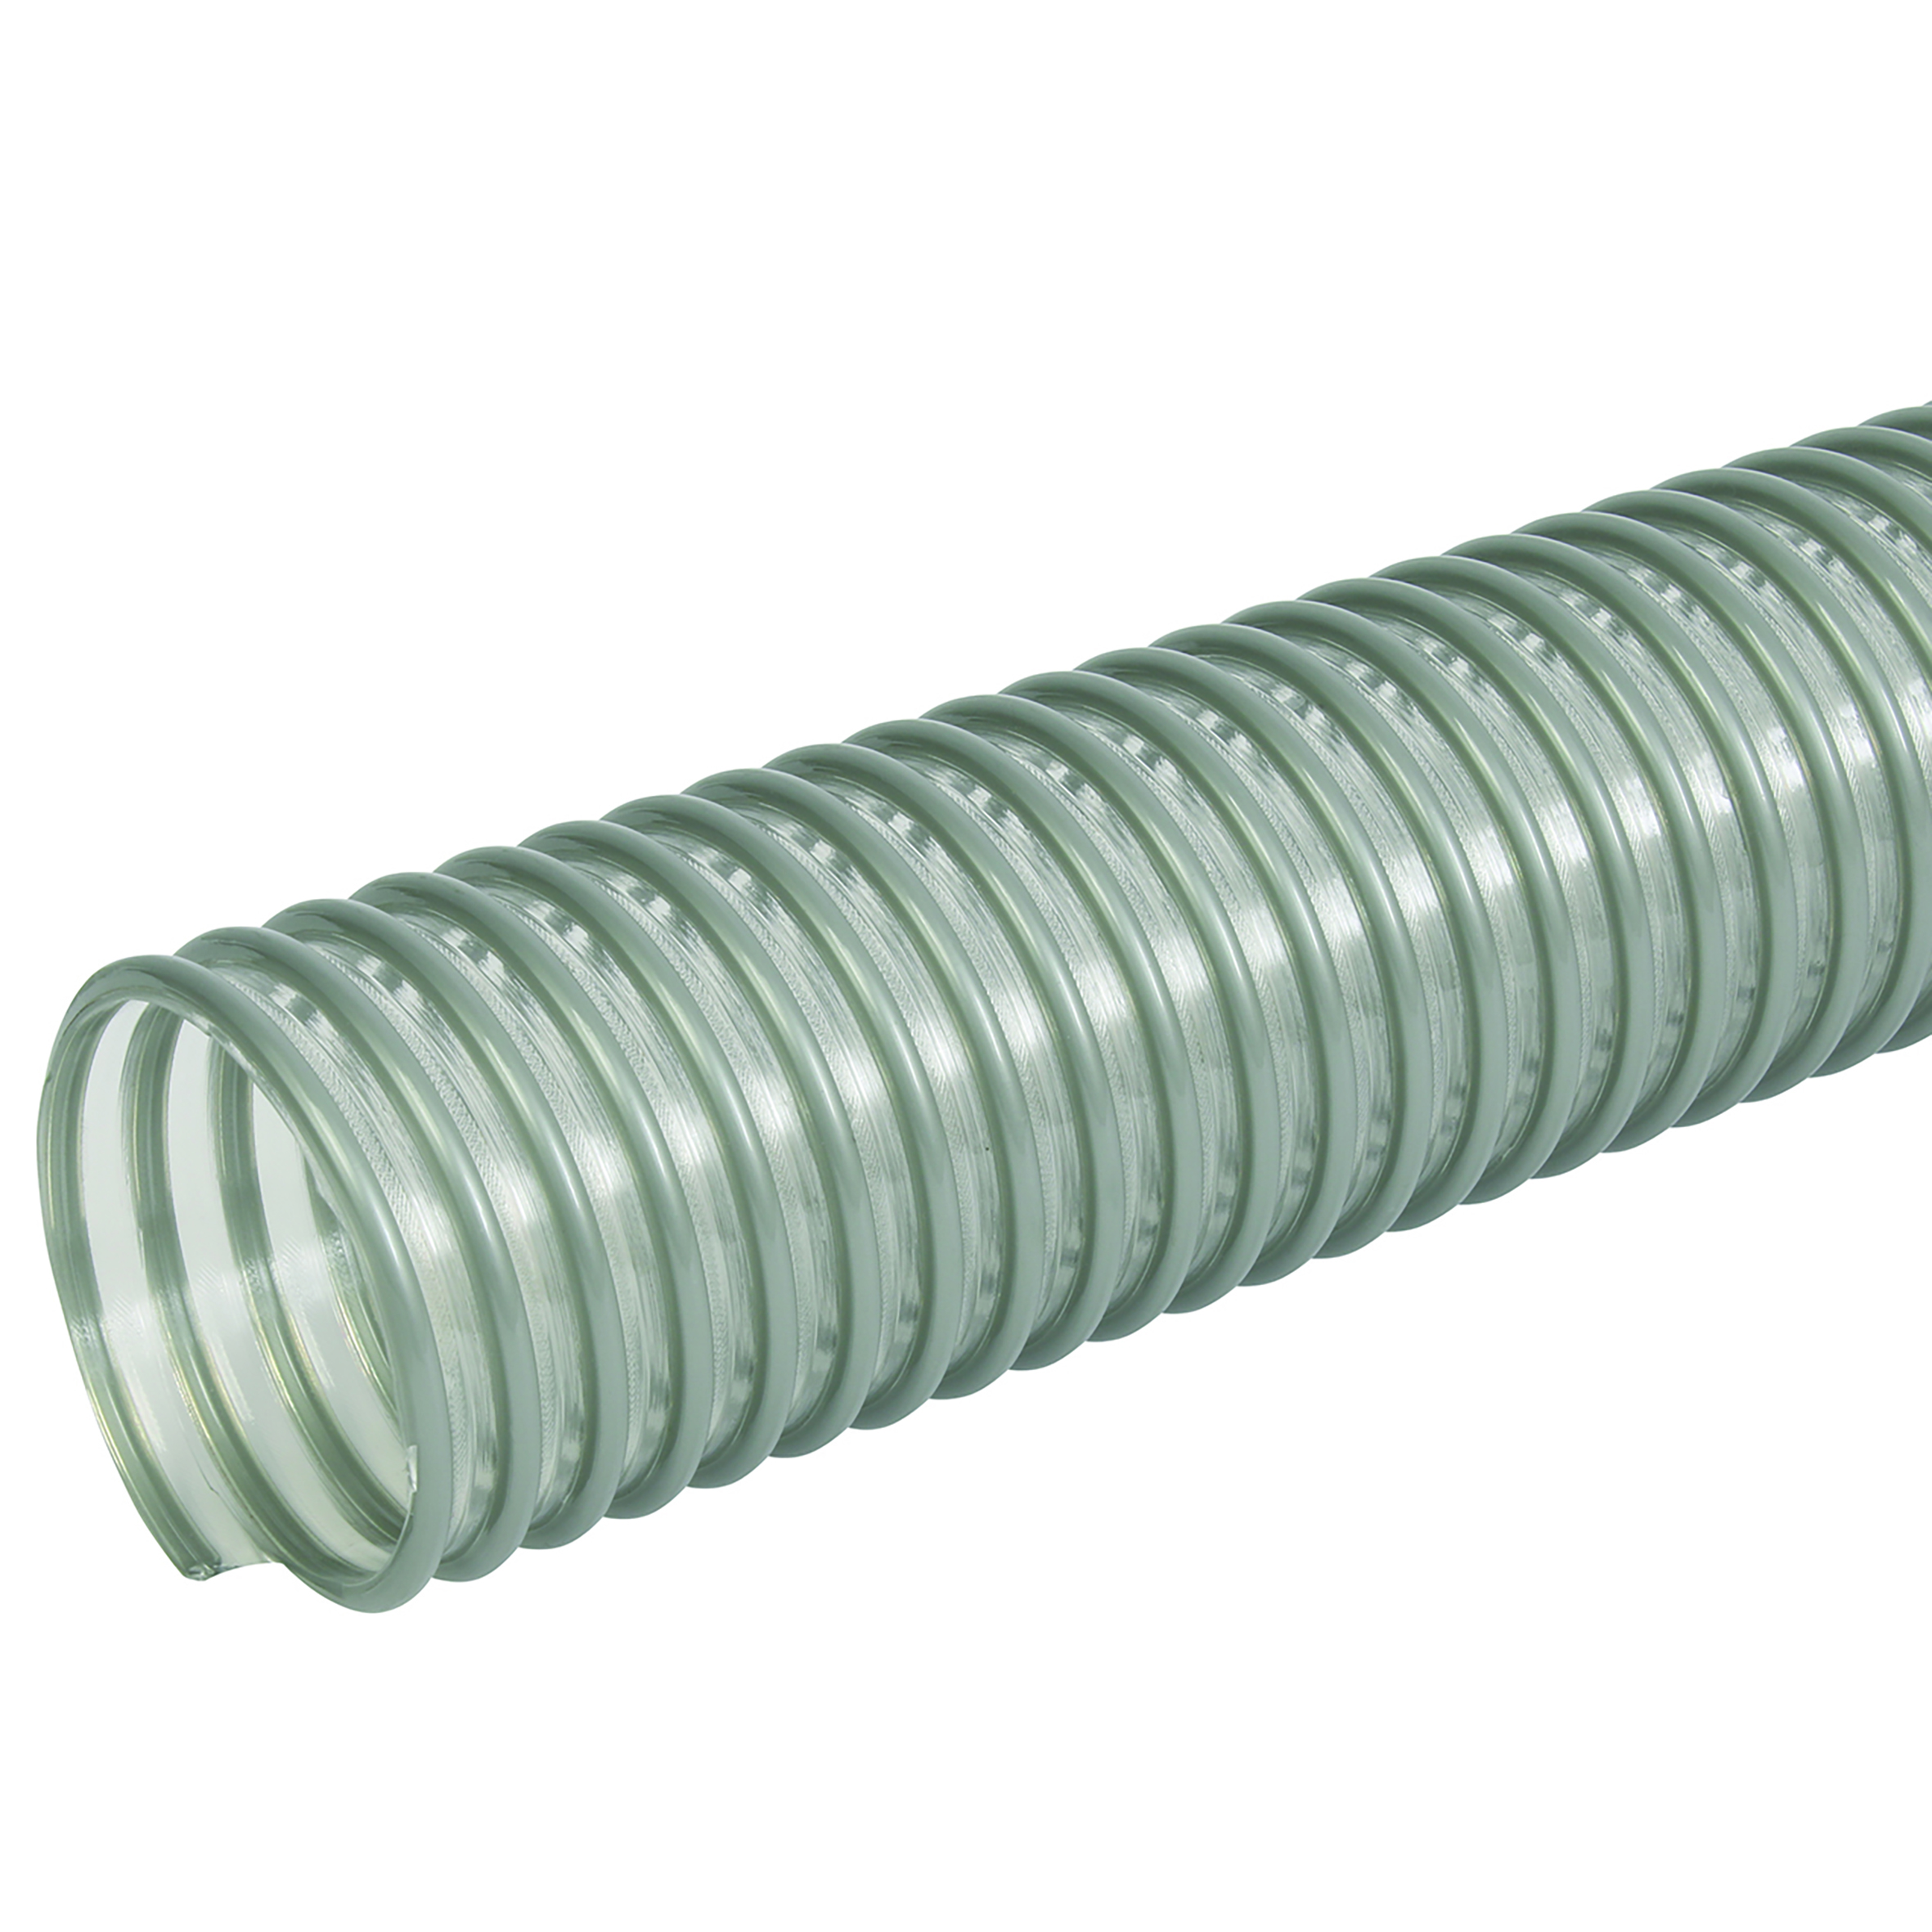 38MM SMOOTH BORE PU DUCTING 10M